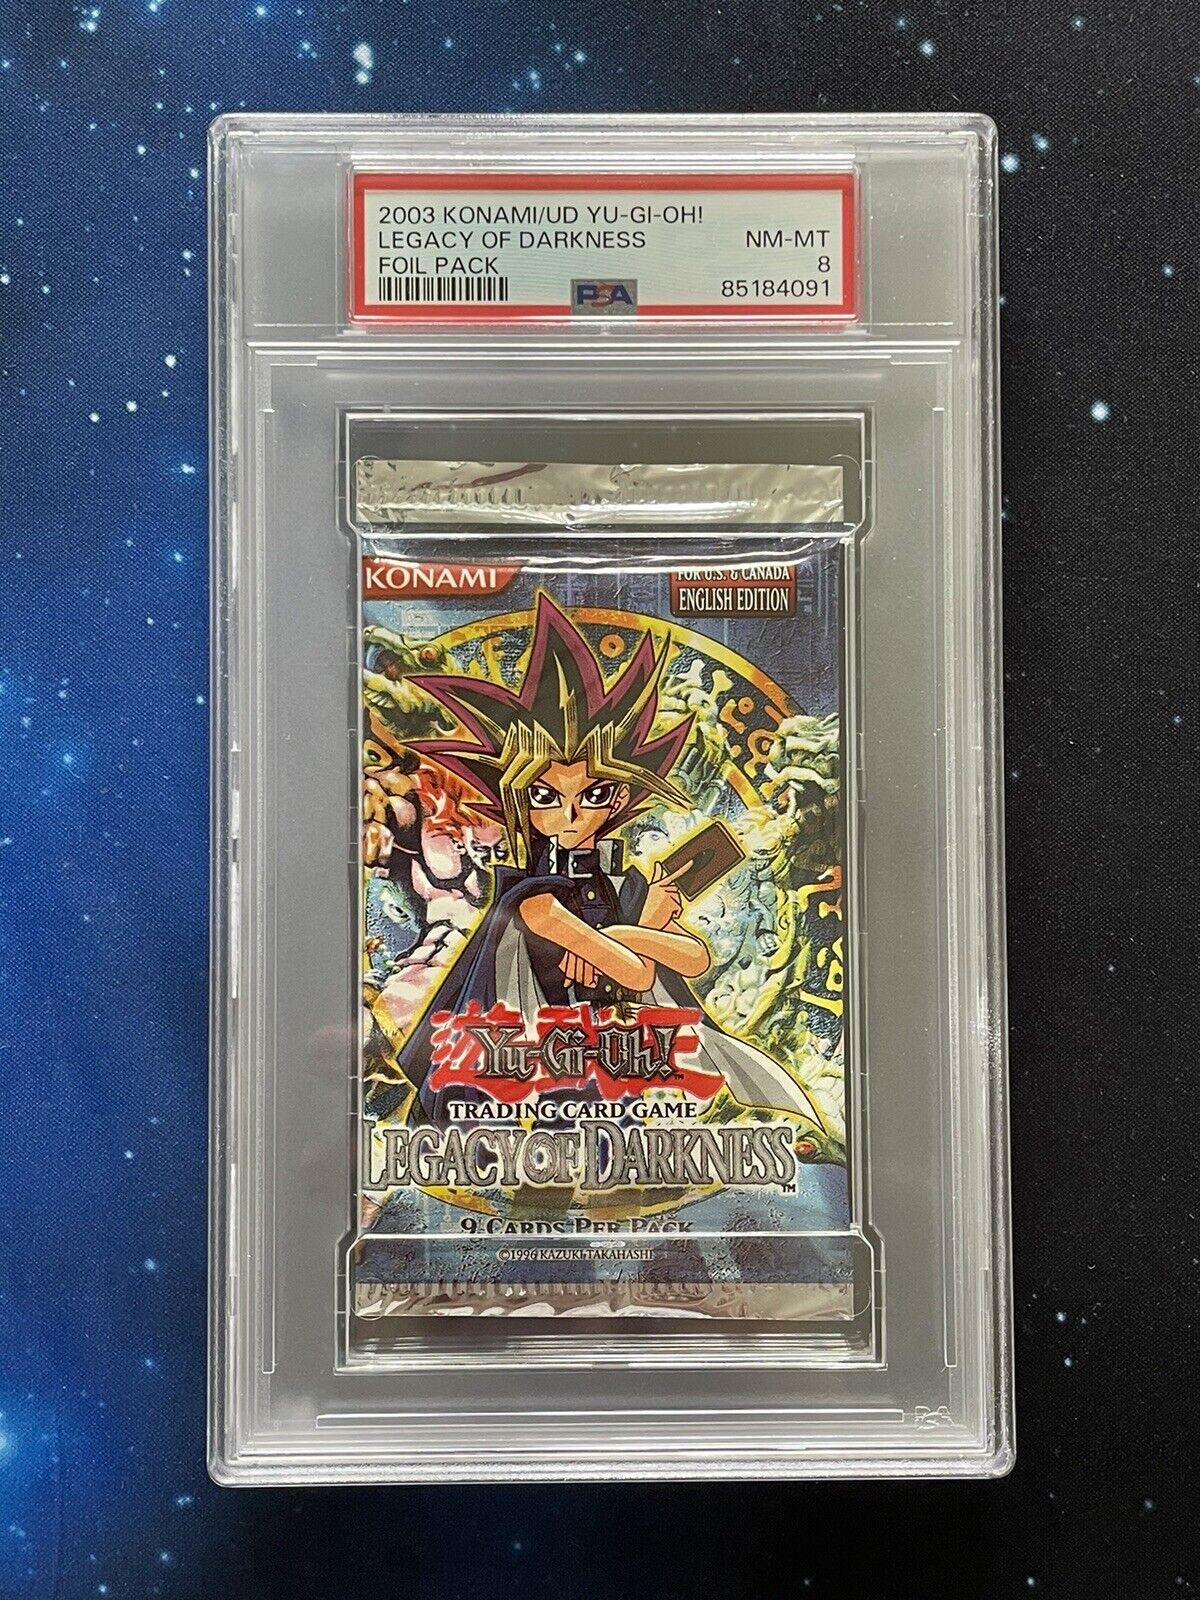 2003 Yugioh Legacy Of Darkness Unlimited Foil Pack Original Print PSA 8 NEW